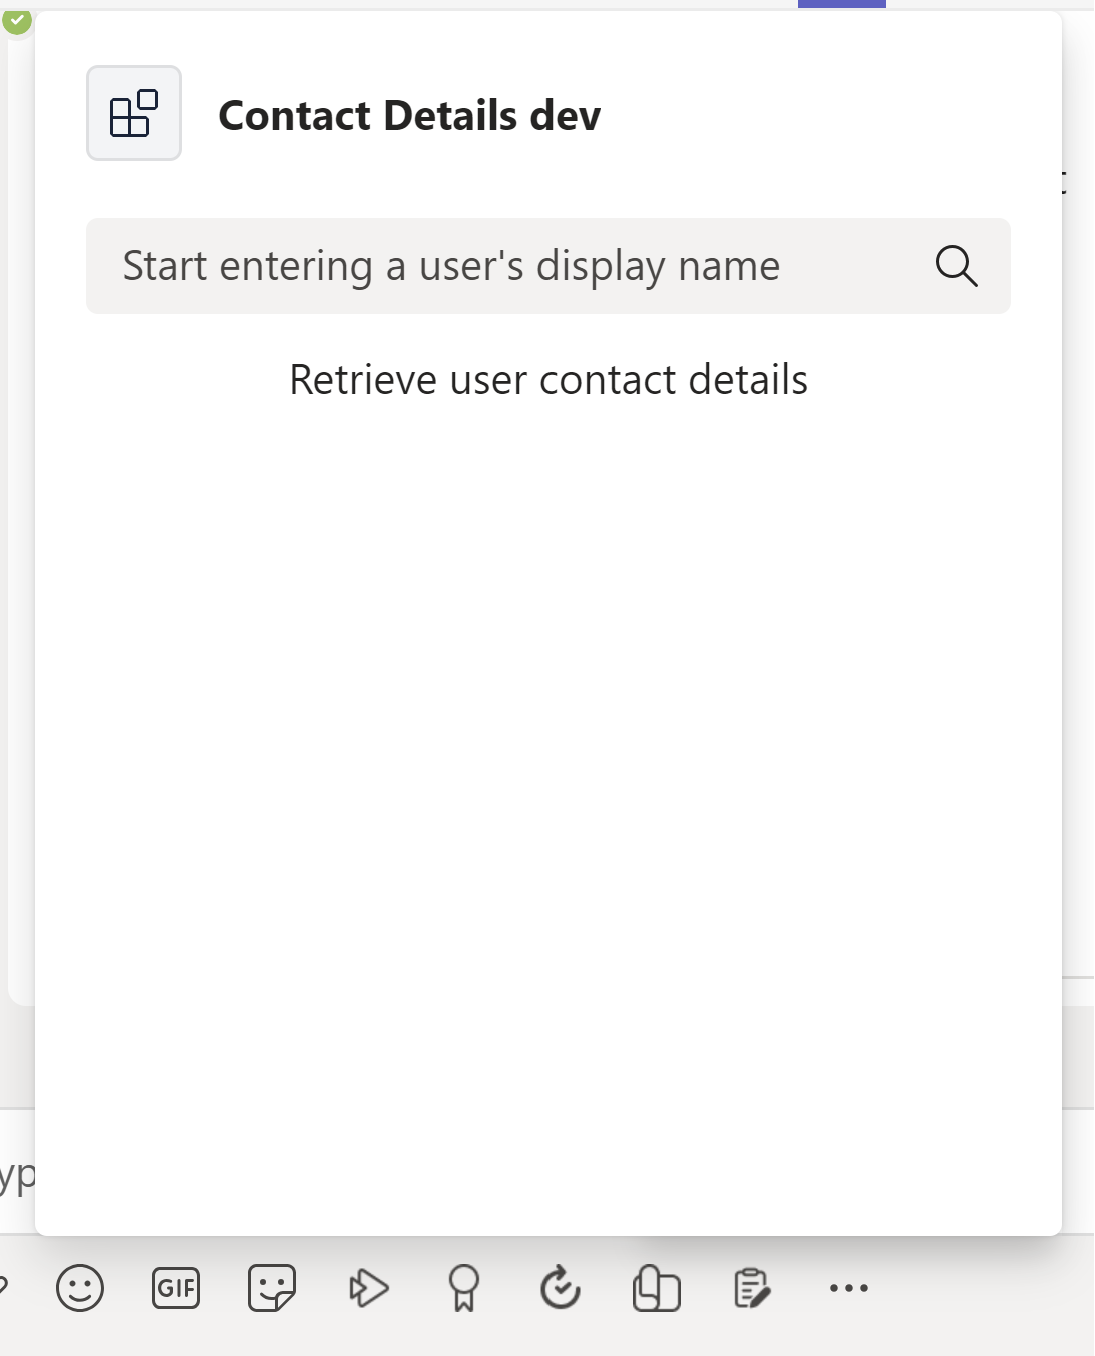 Screenshot of the contact details message extension in Teams.